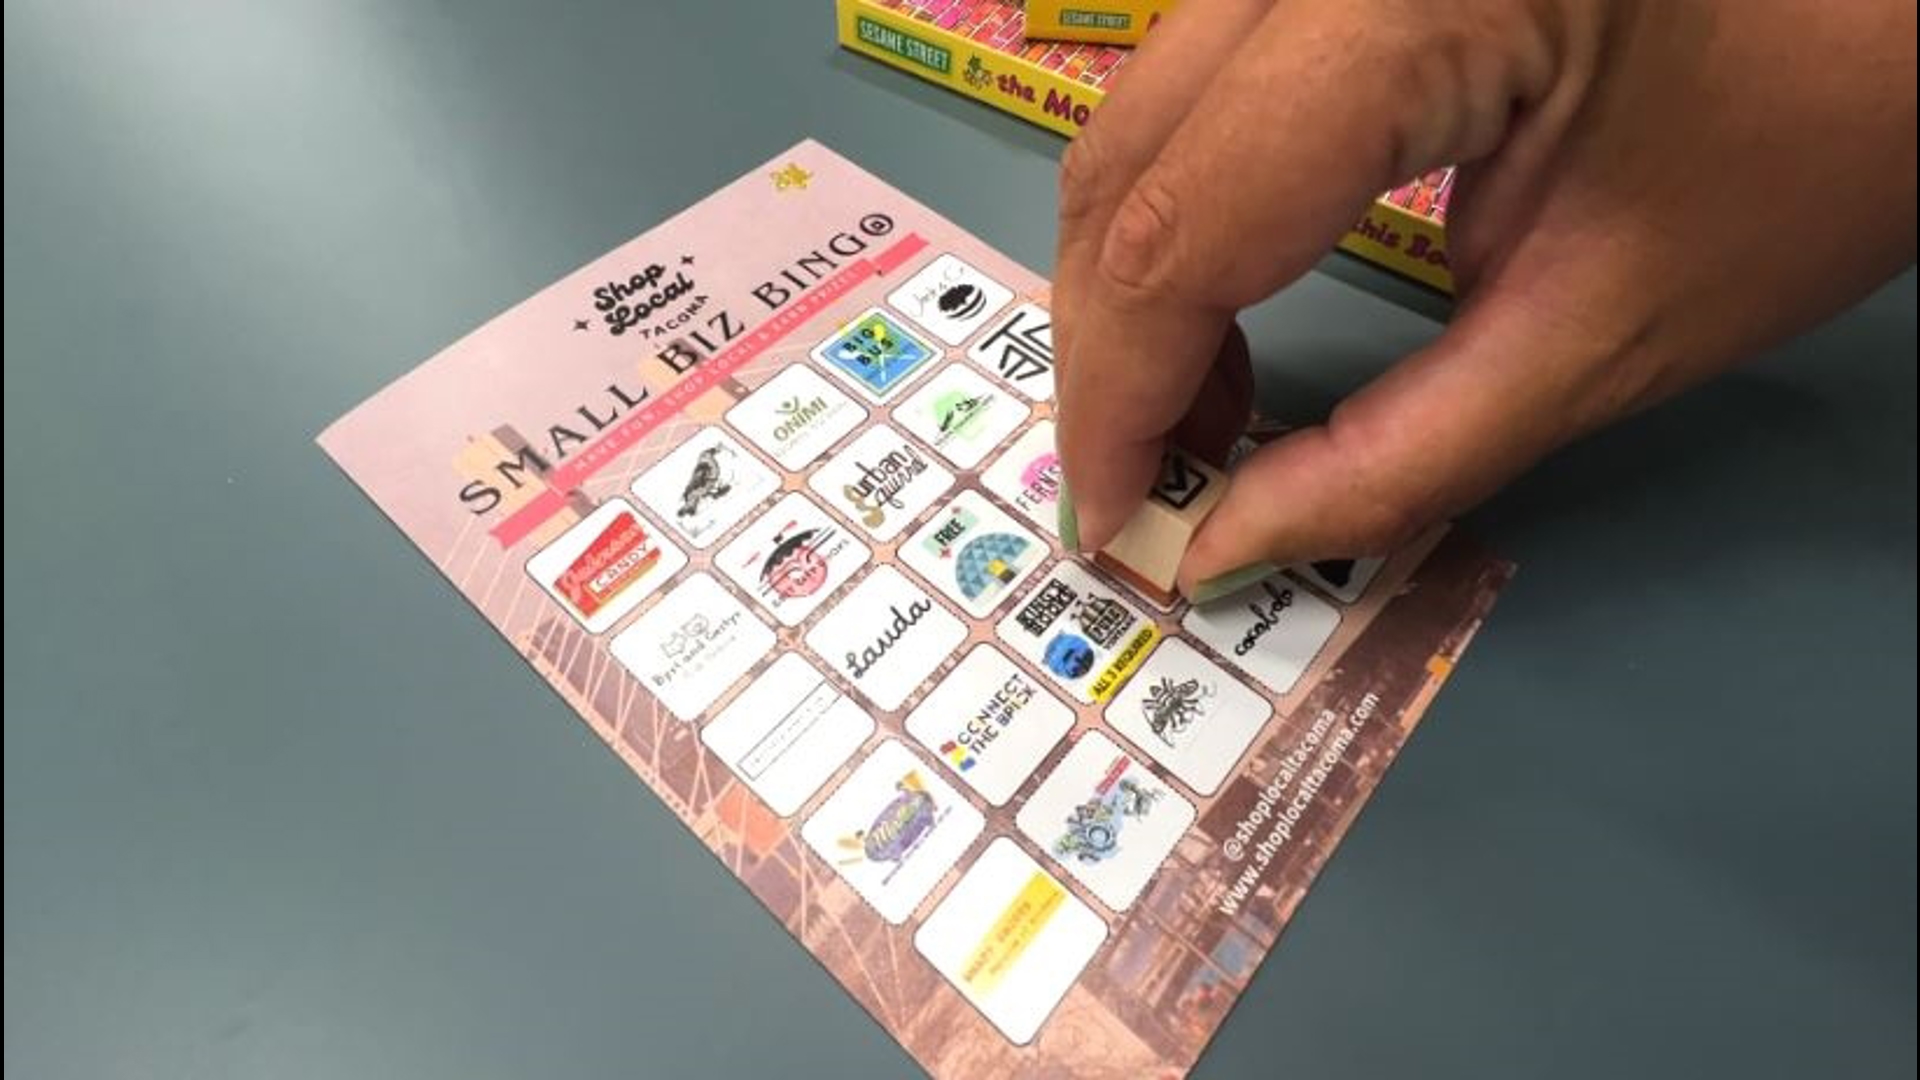 For the entire month of July, shoppers in Tacoma can have fun, help small local businesses and win prizes by playing Small Biz Bingo #k5evening